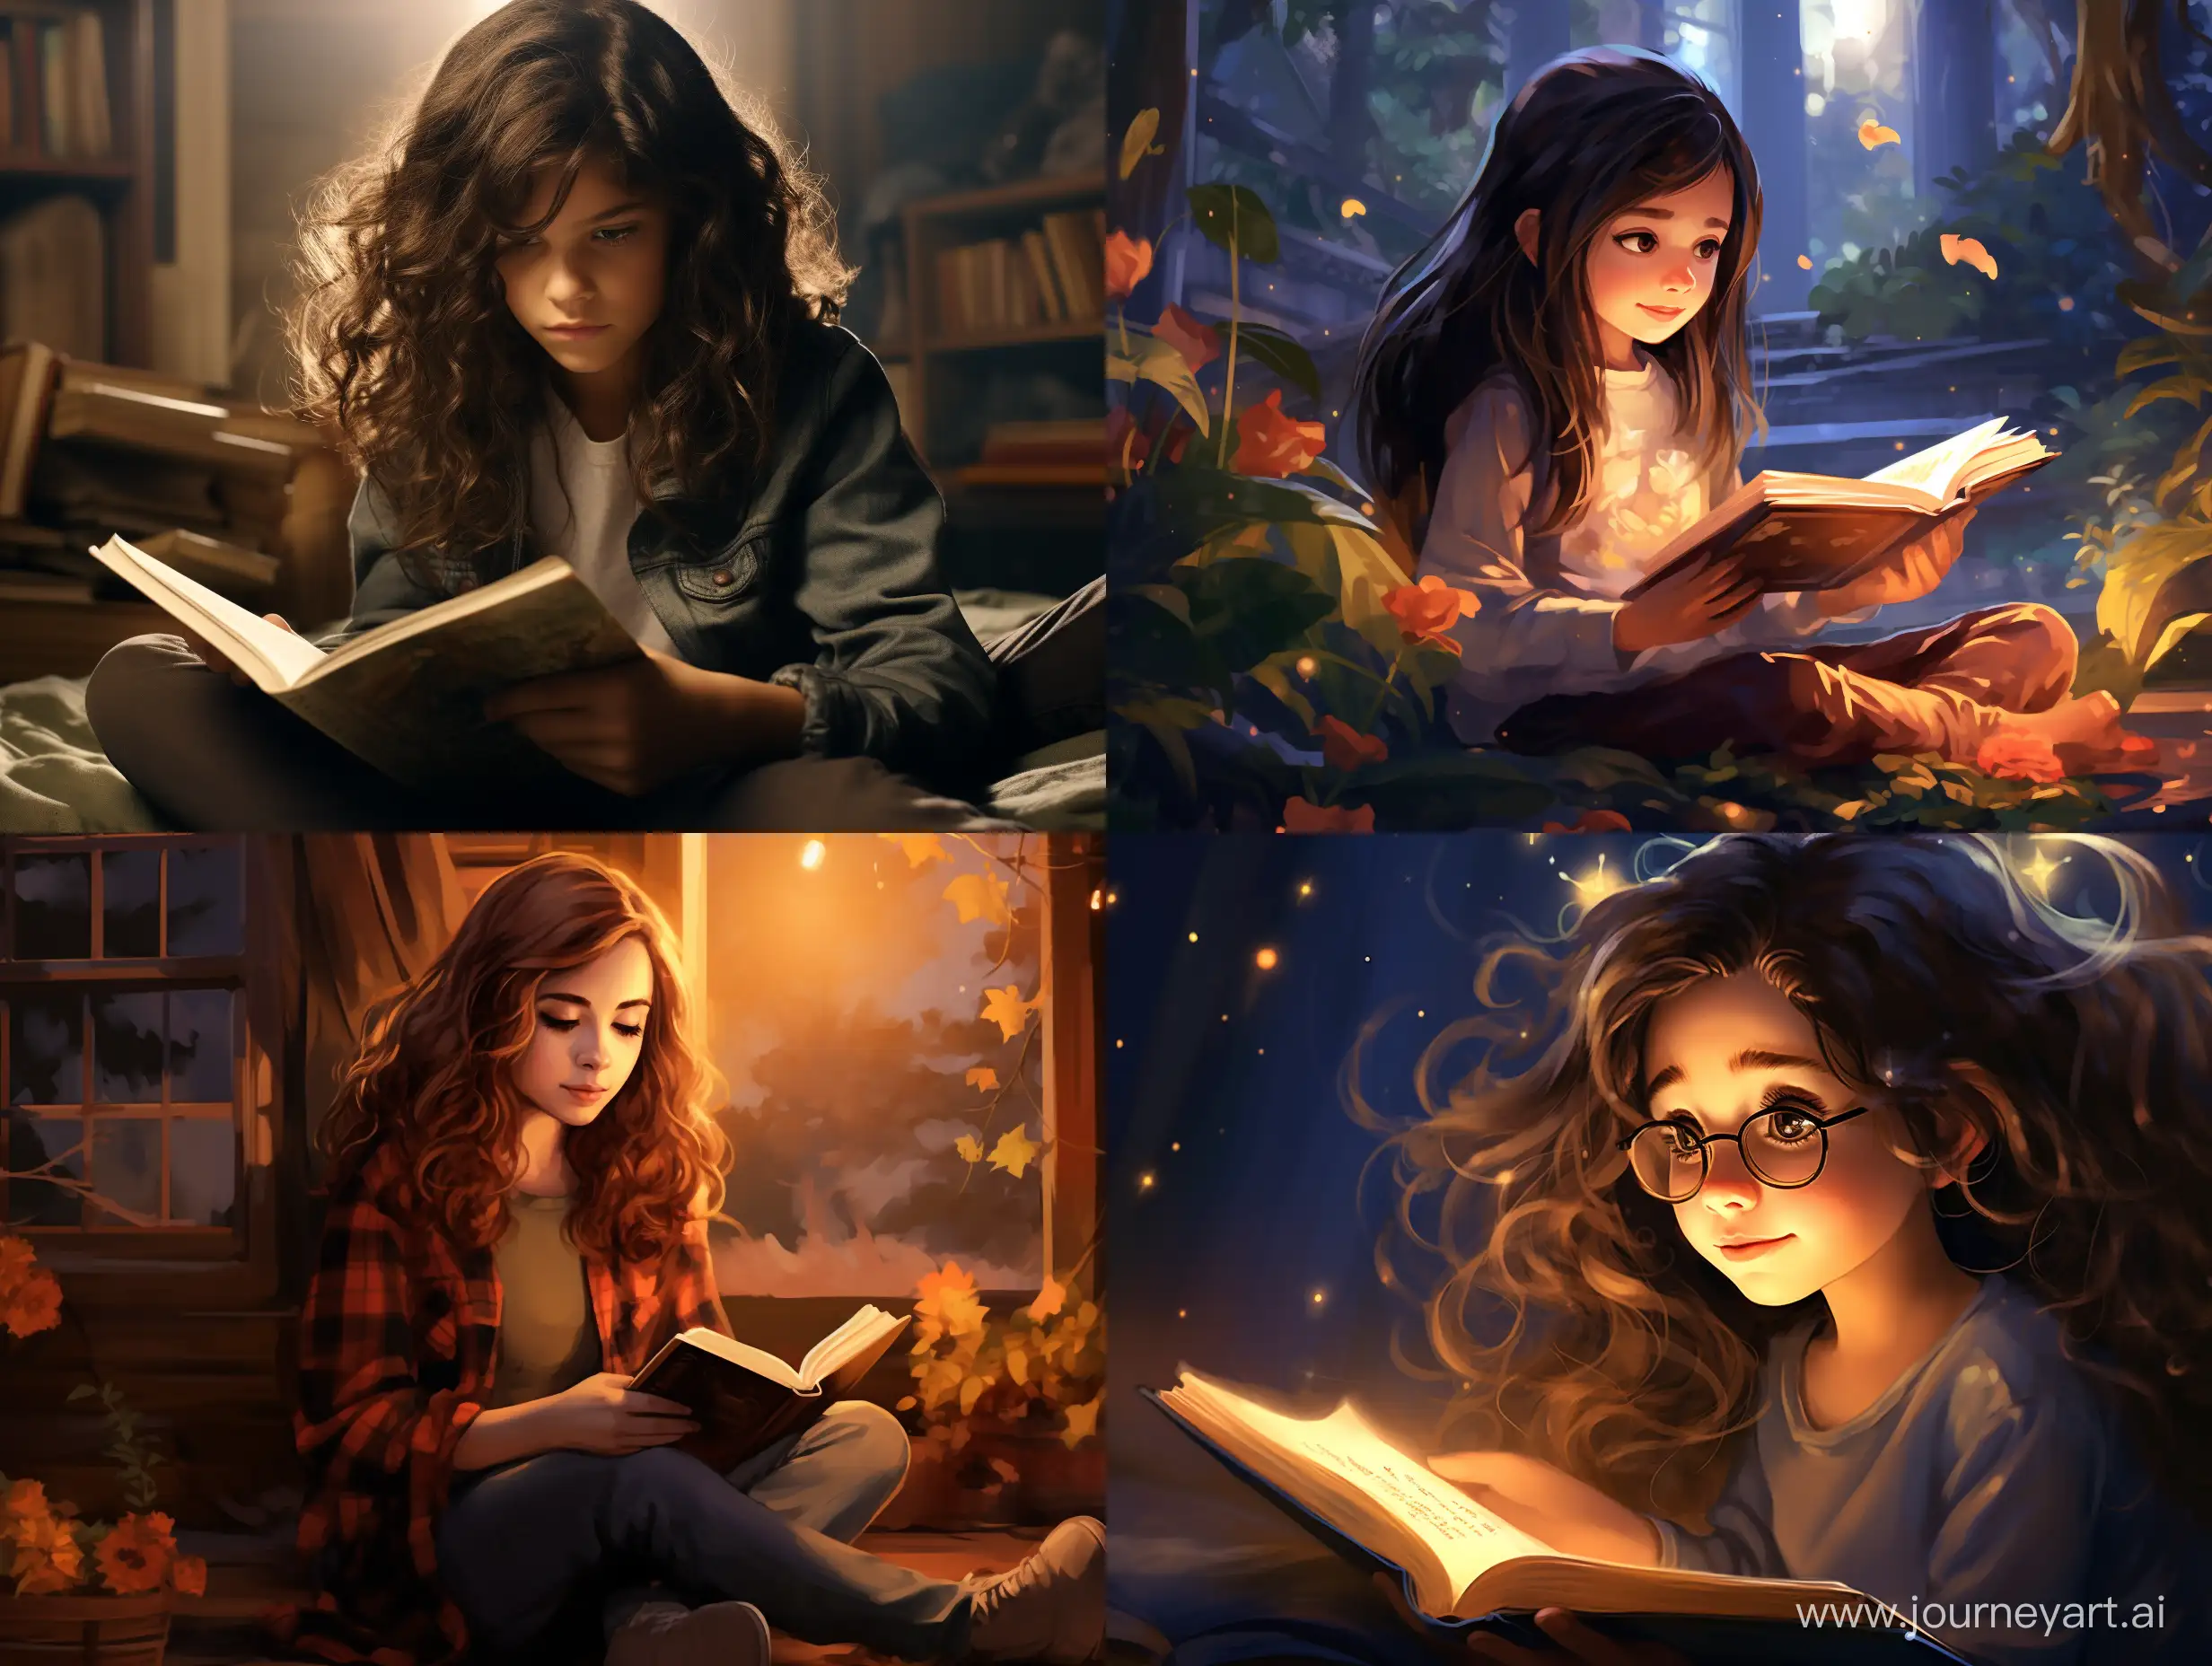 Young-Girl-Immersed-in-Book-Reading-Moment